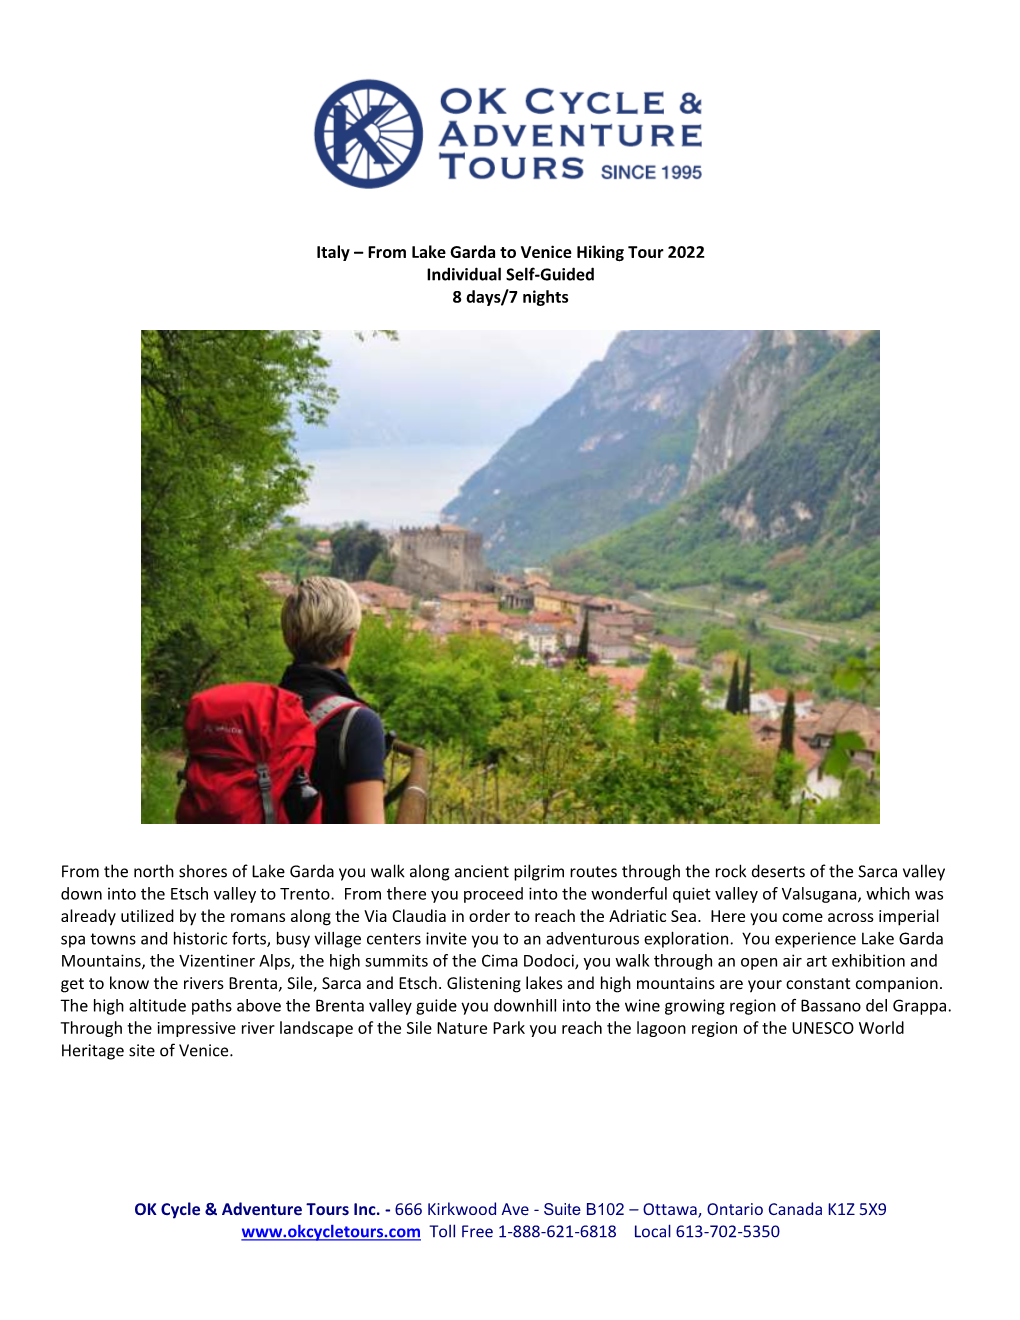 Italy – from Lake Garda to Venice Hiking Tour 2022 Individual Self-Guided 8 Days/7 Nights